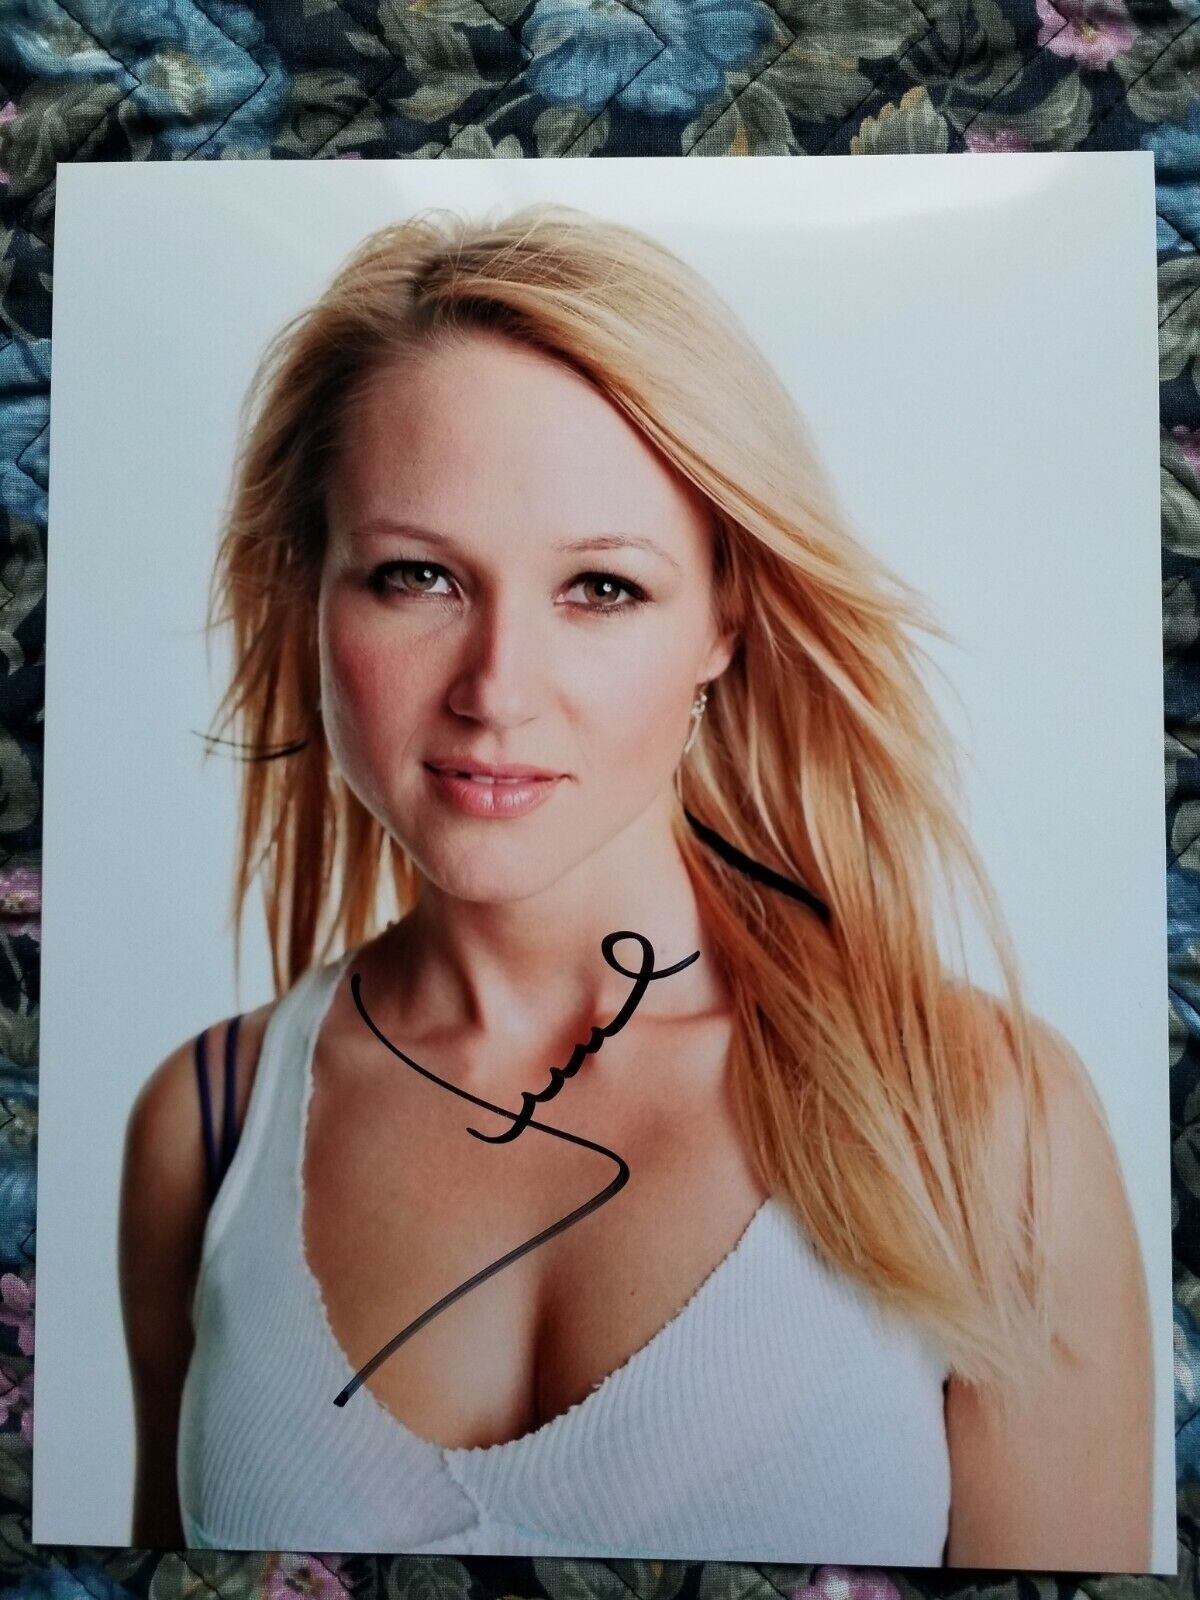 Jewel Kilcher Authentic Signed Singer Producer Actress 8x10 Photo Poster painting Autograped